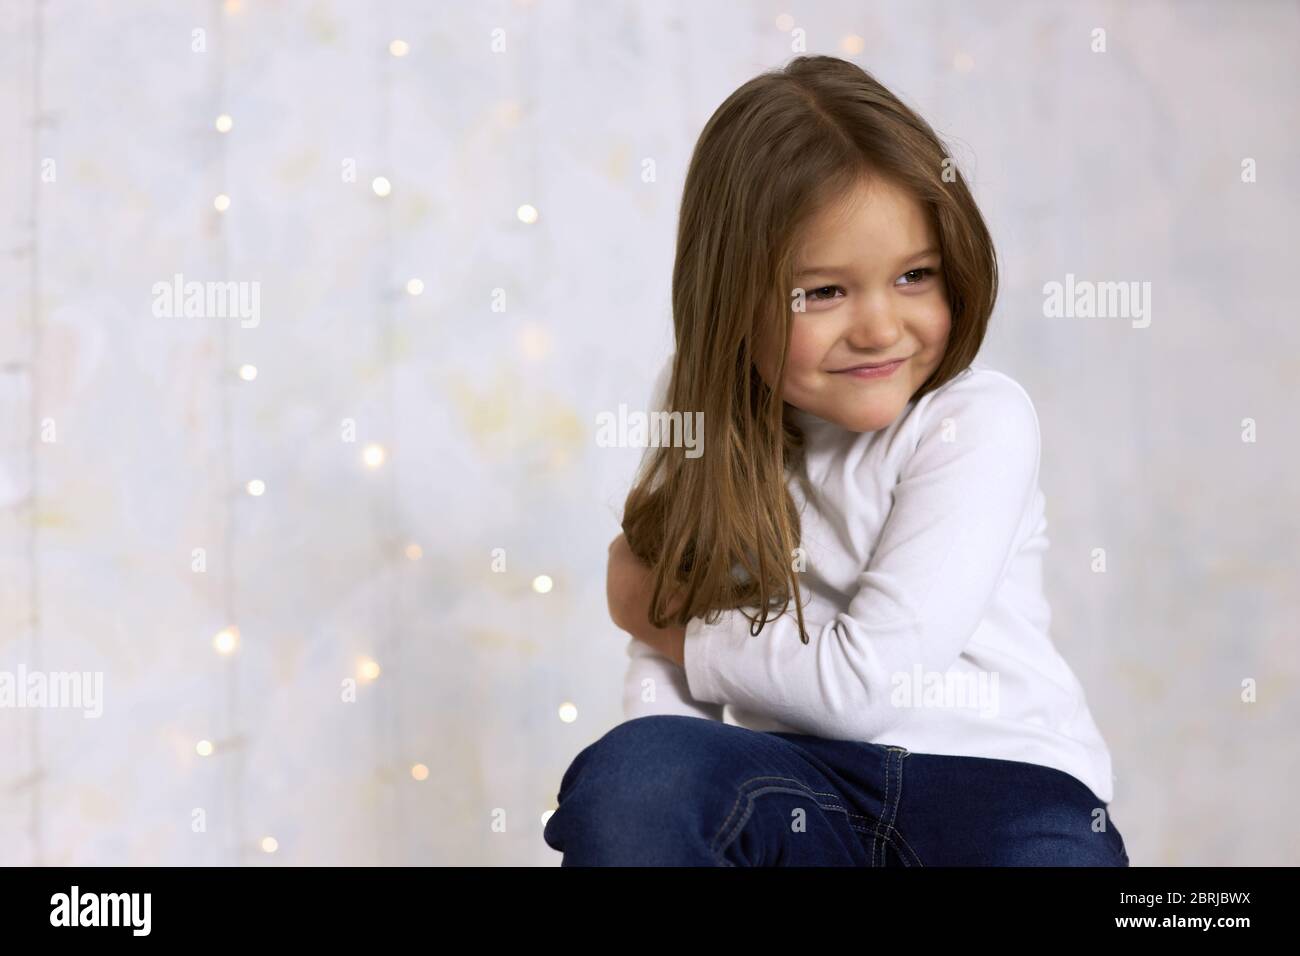 Portrait of a smiling little girl on a light background decorated with garlands. Stock Photo